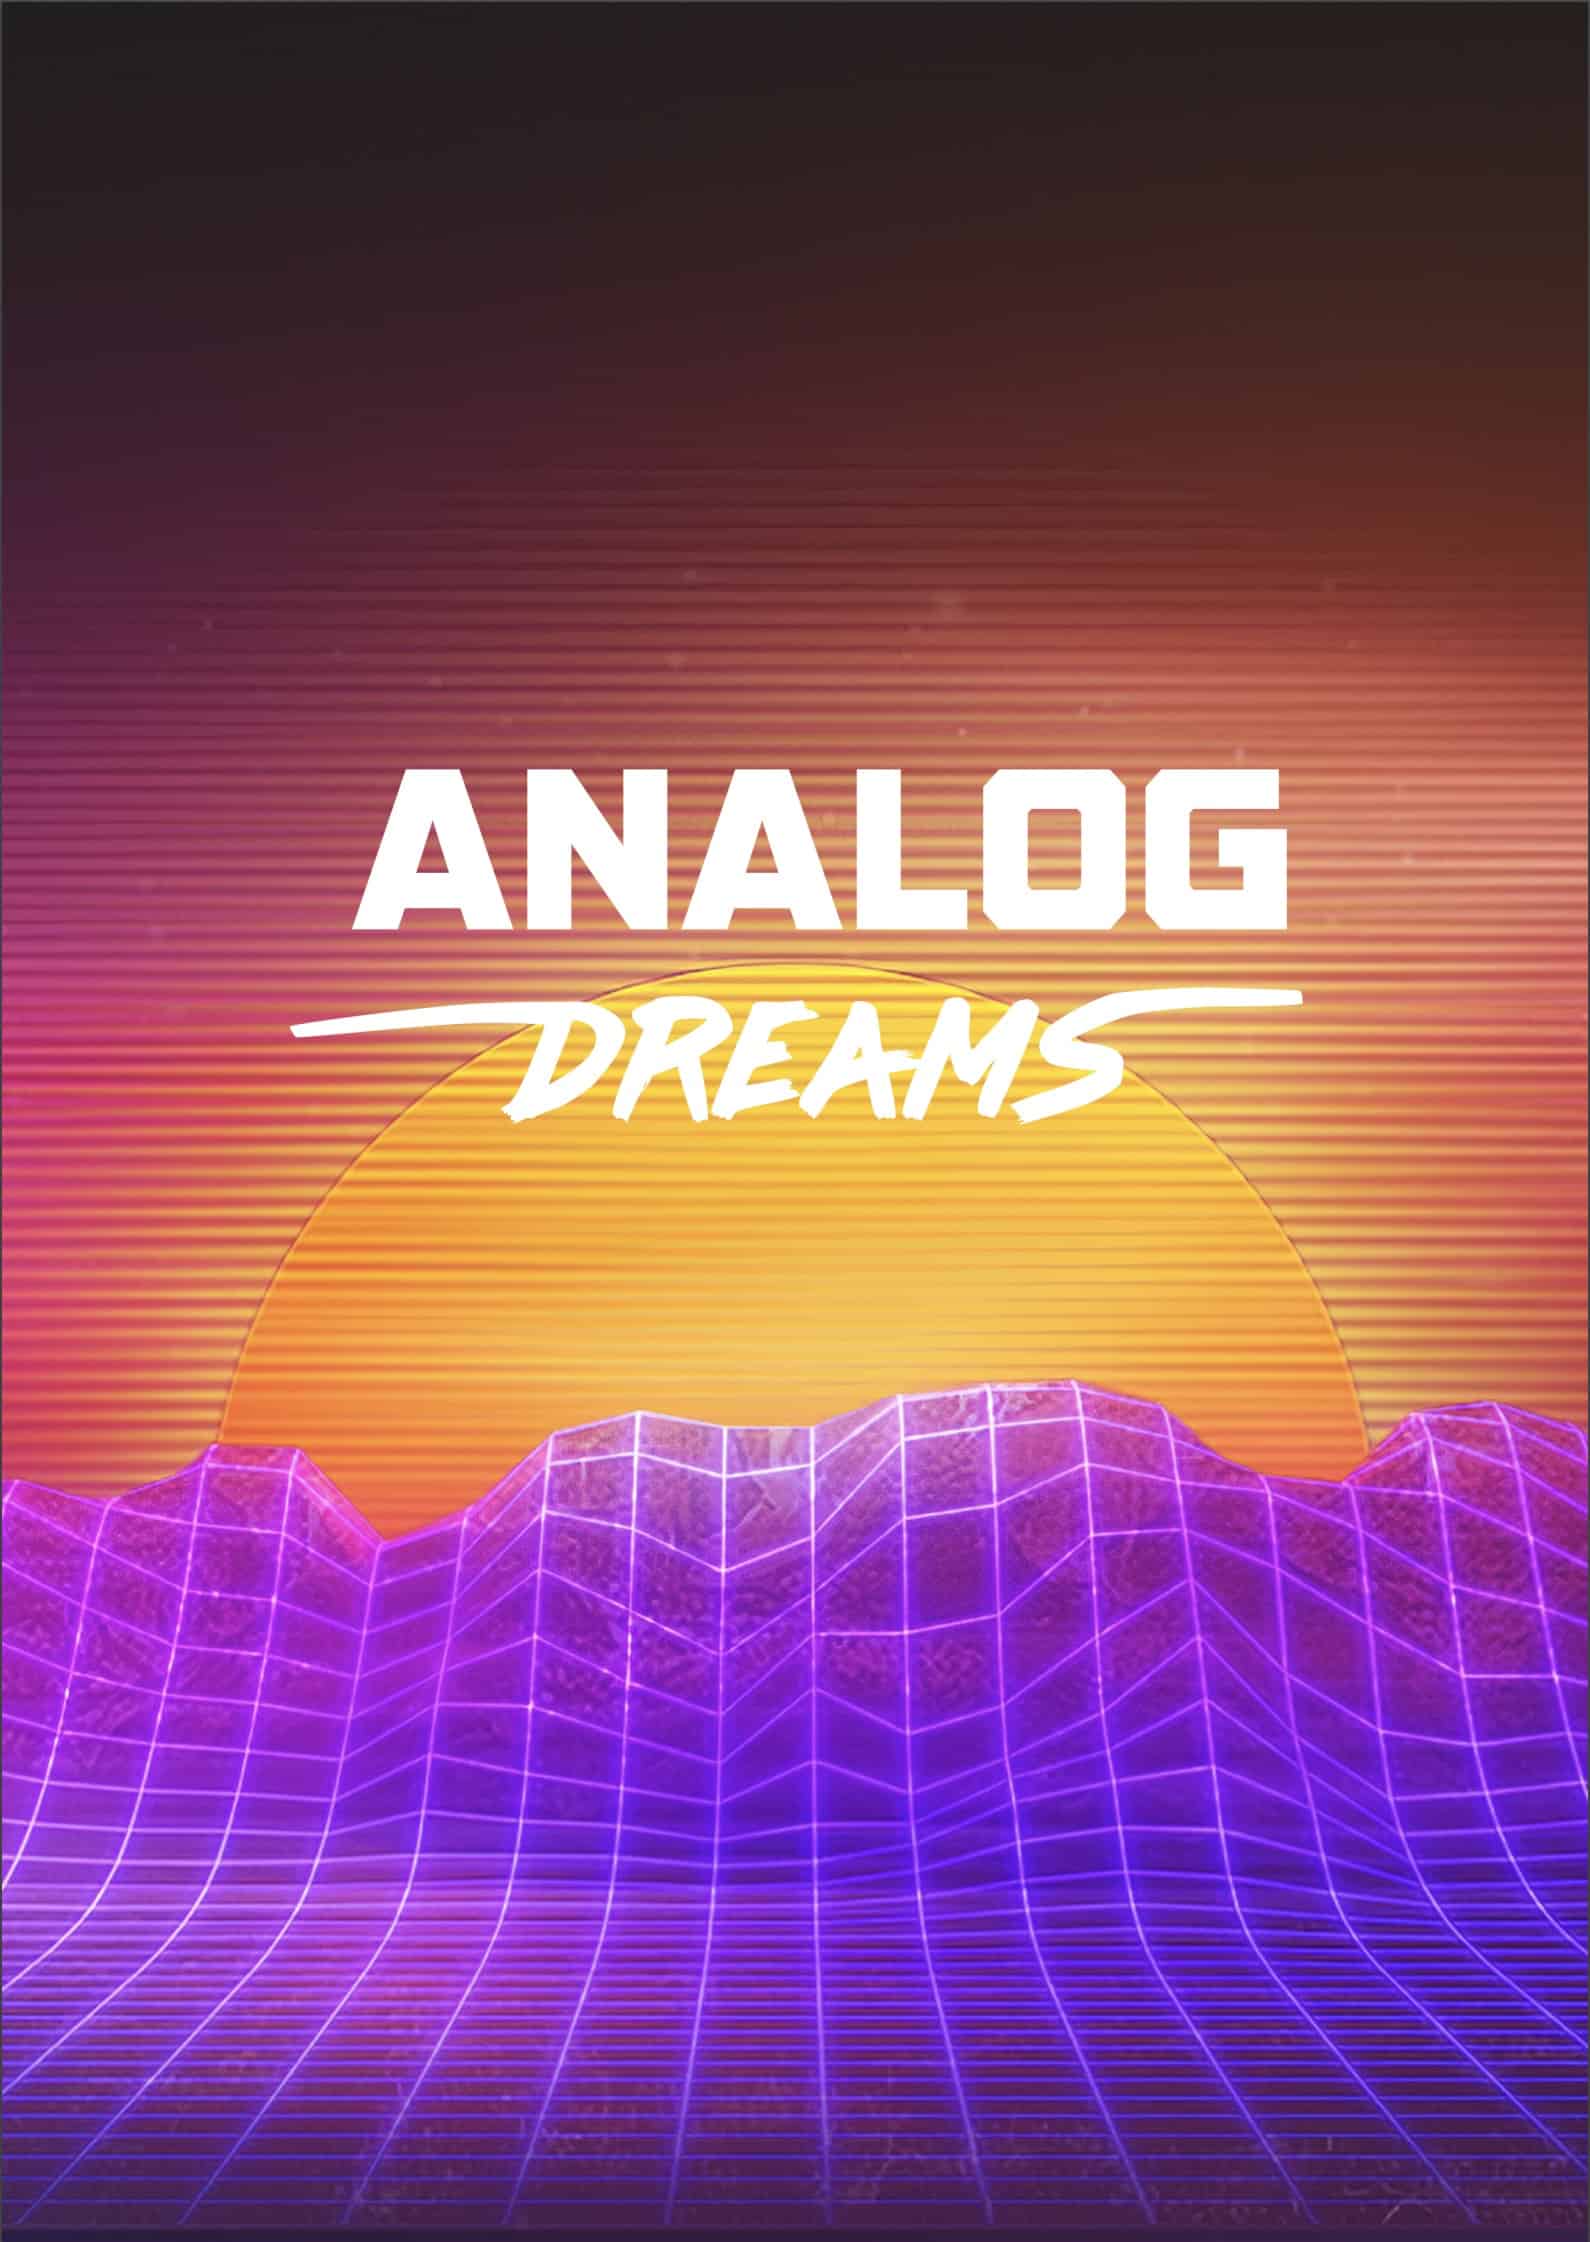 ANALOG DREAMS by Native Instruments for Free